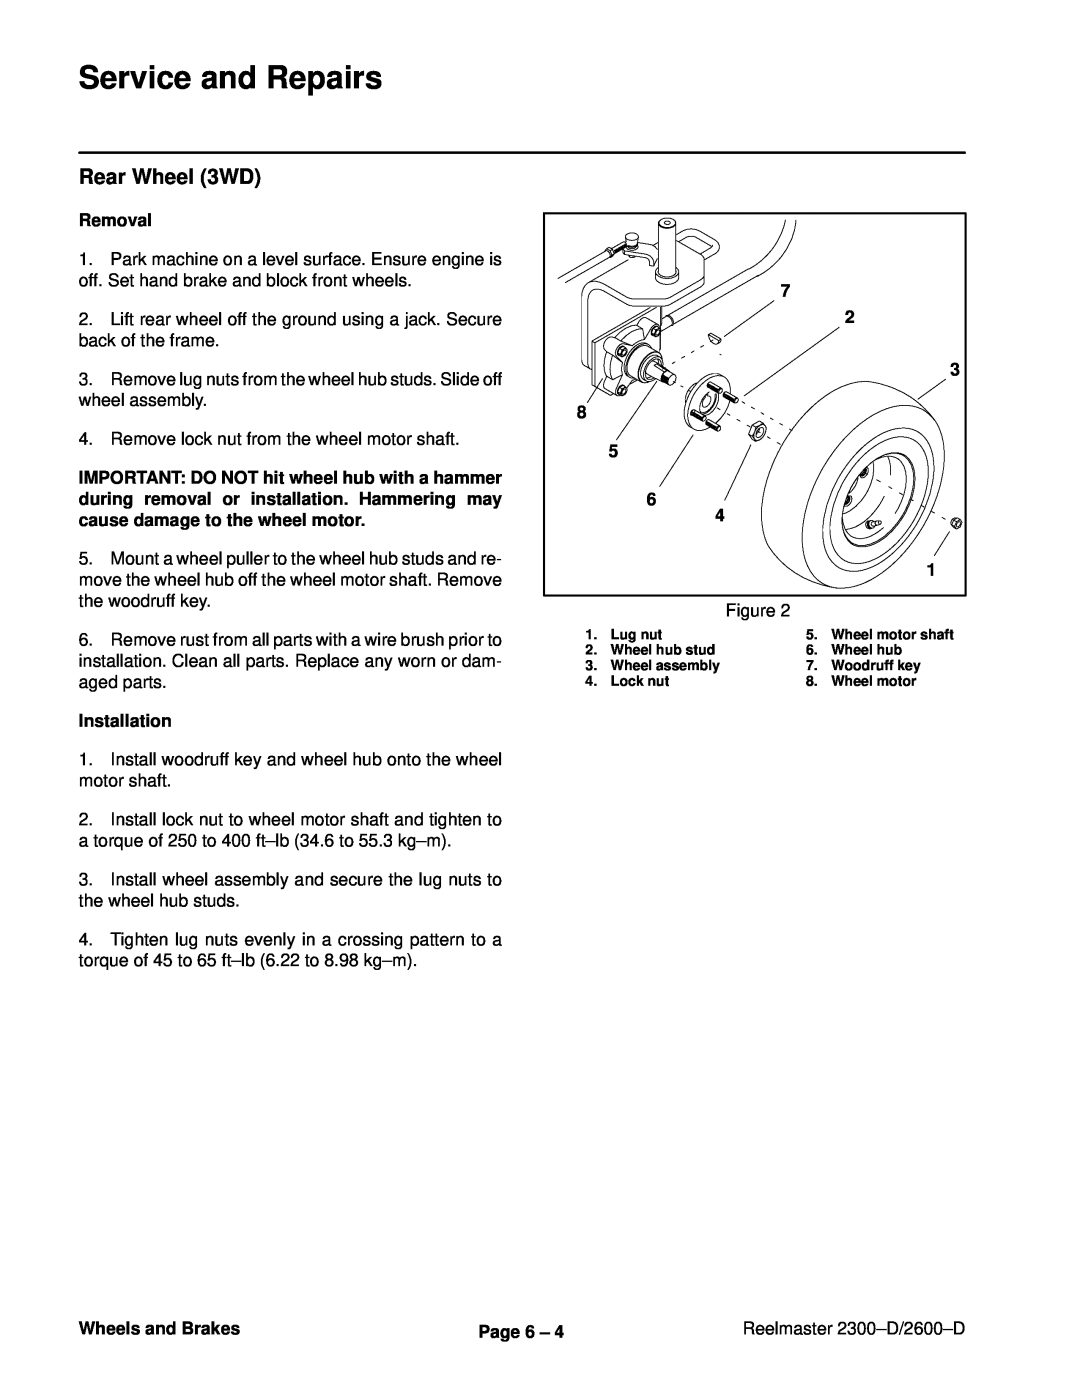 Toro 2300-D, 2600D service manual Rear Wheel 3WD, Service and Repairs, Removal, Installation, Wheels and Brakes, Page 6 ± 